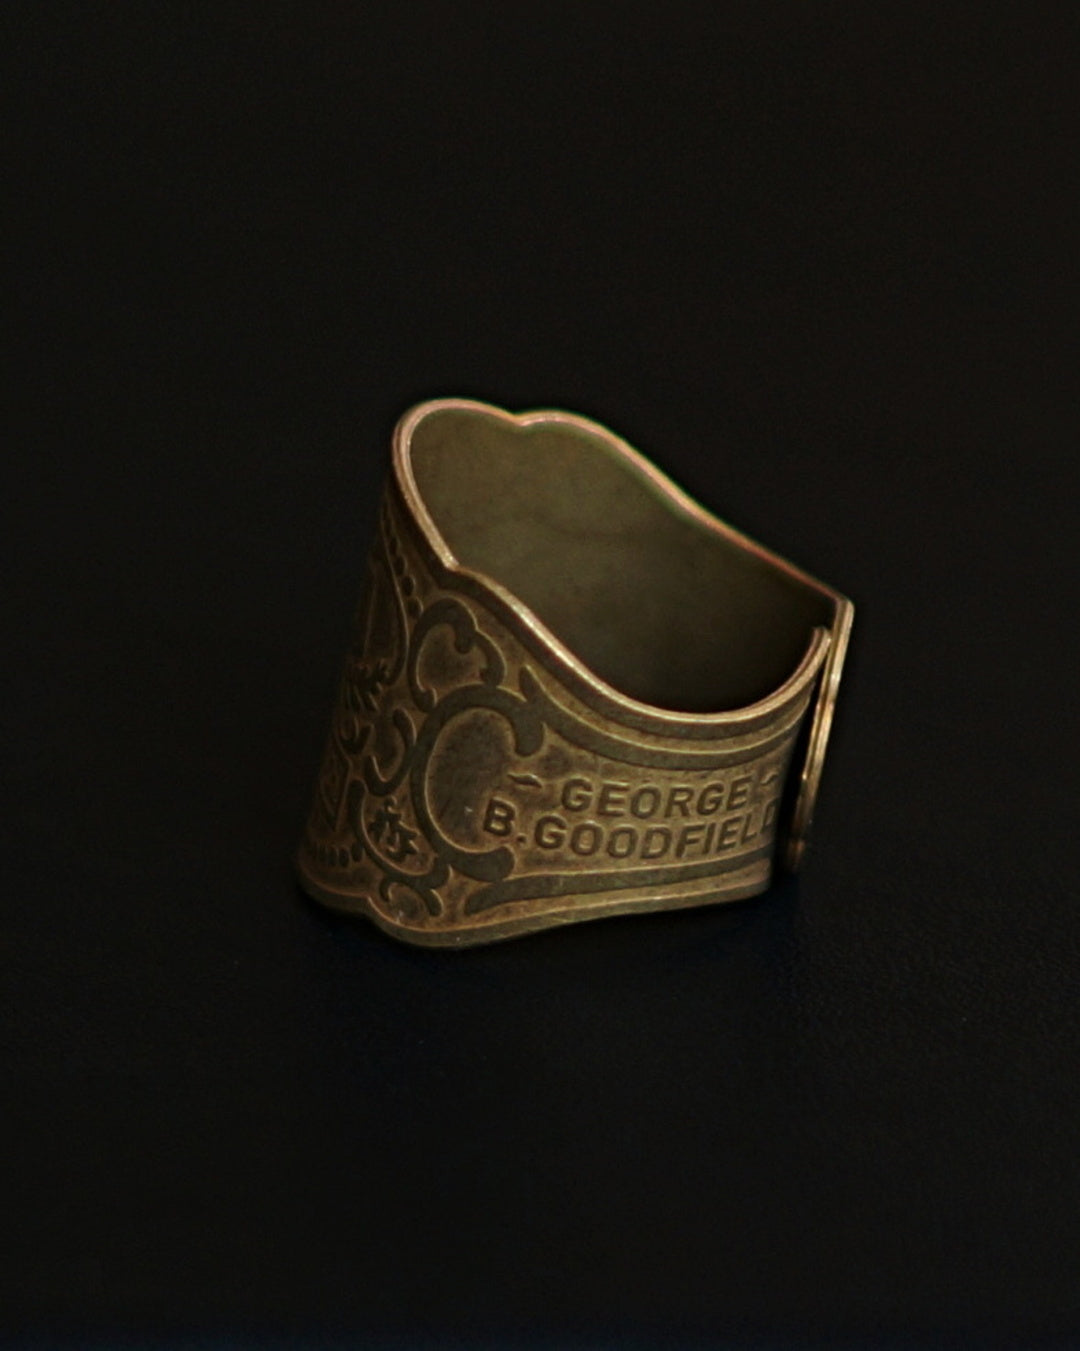 GLADHAND & Co. | CIGAR TAG RING - Gold No.01